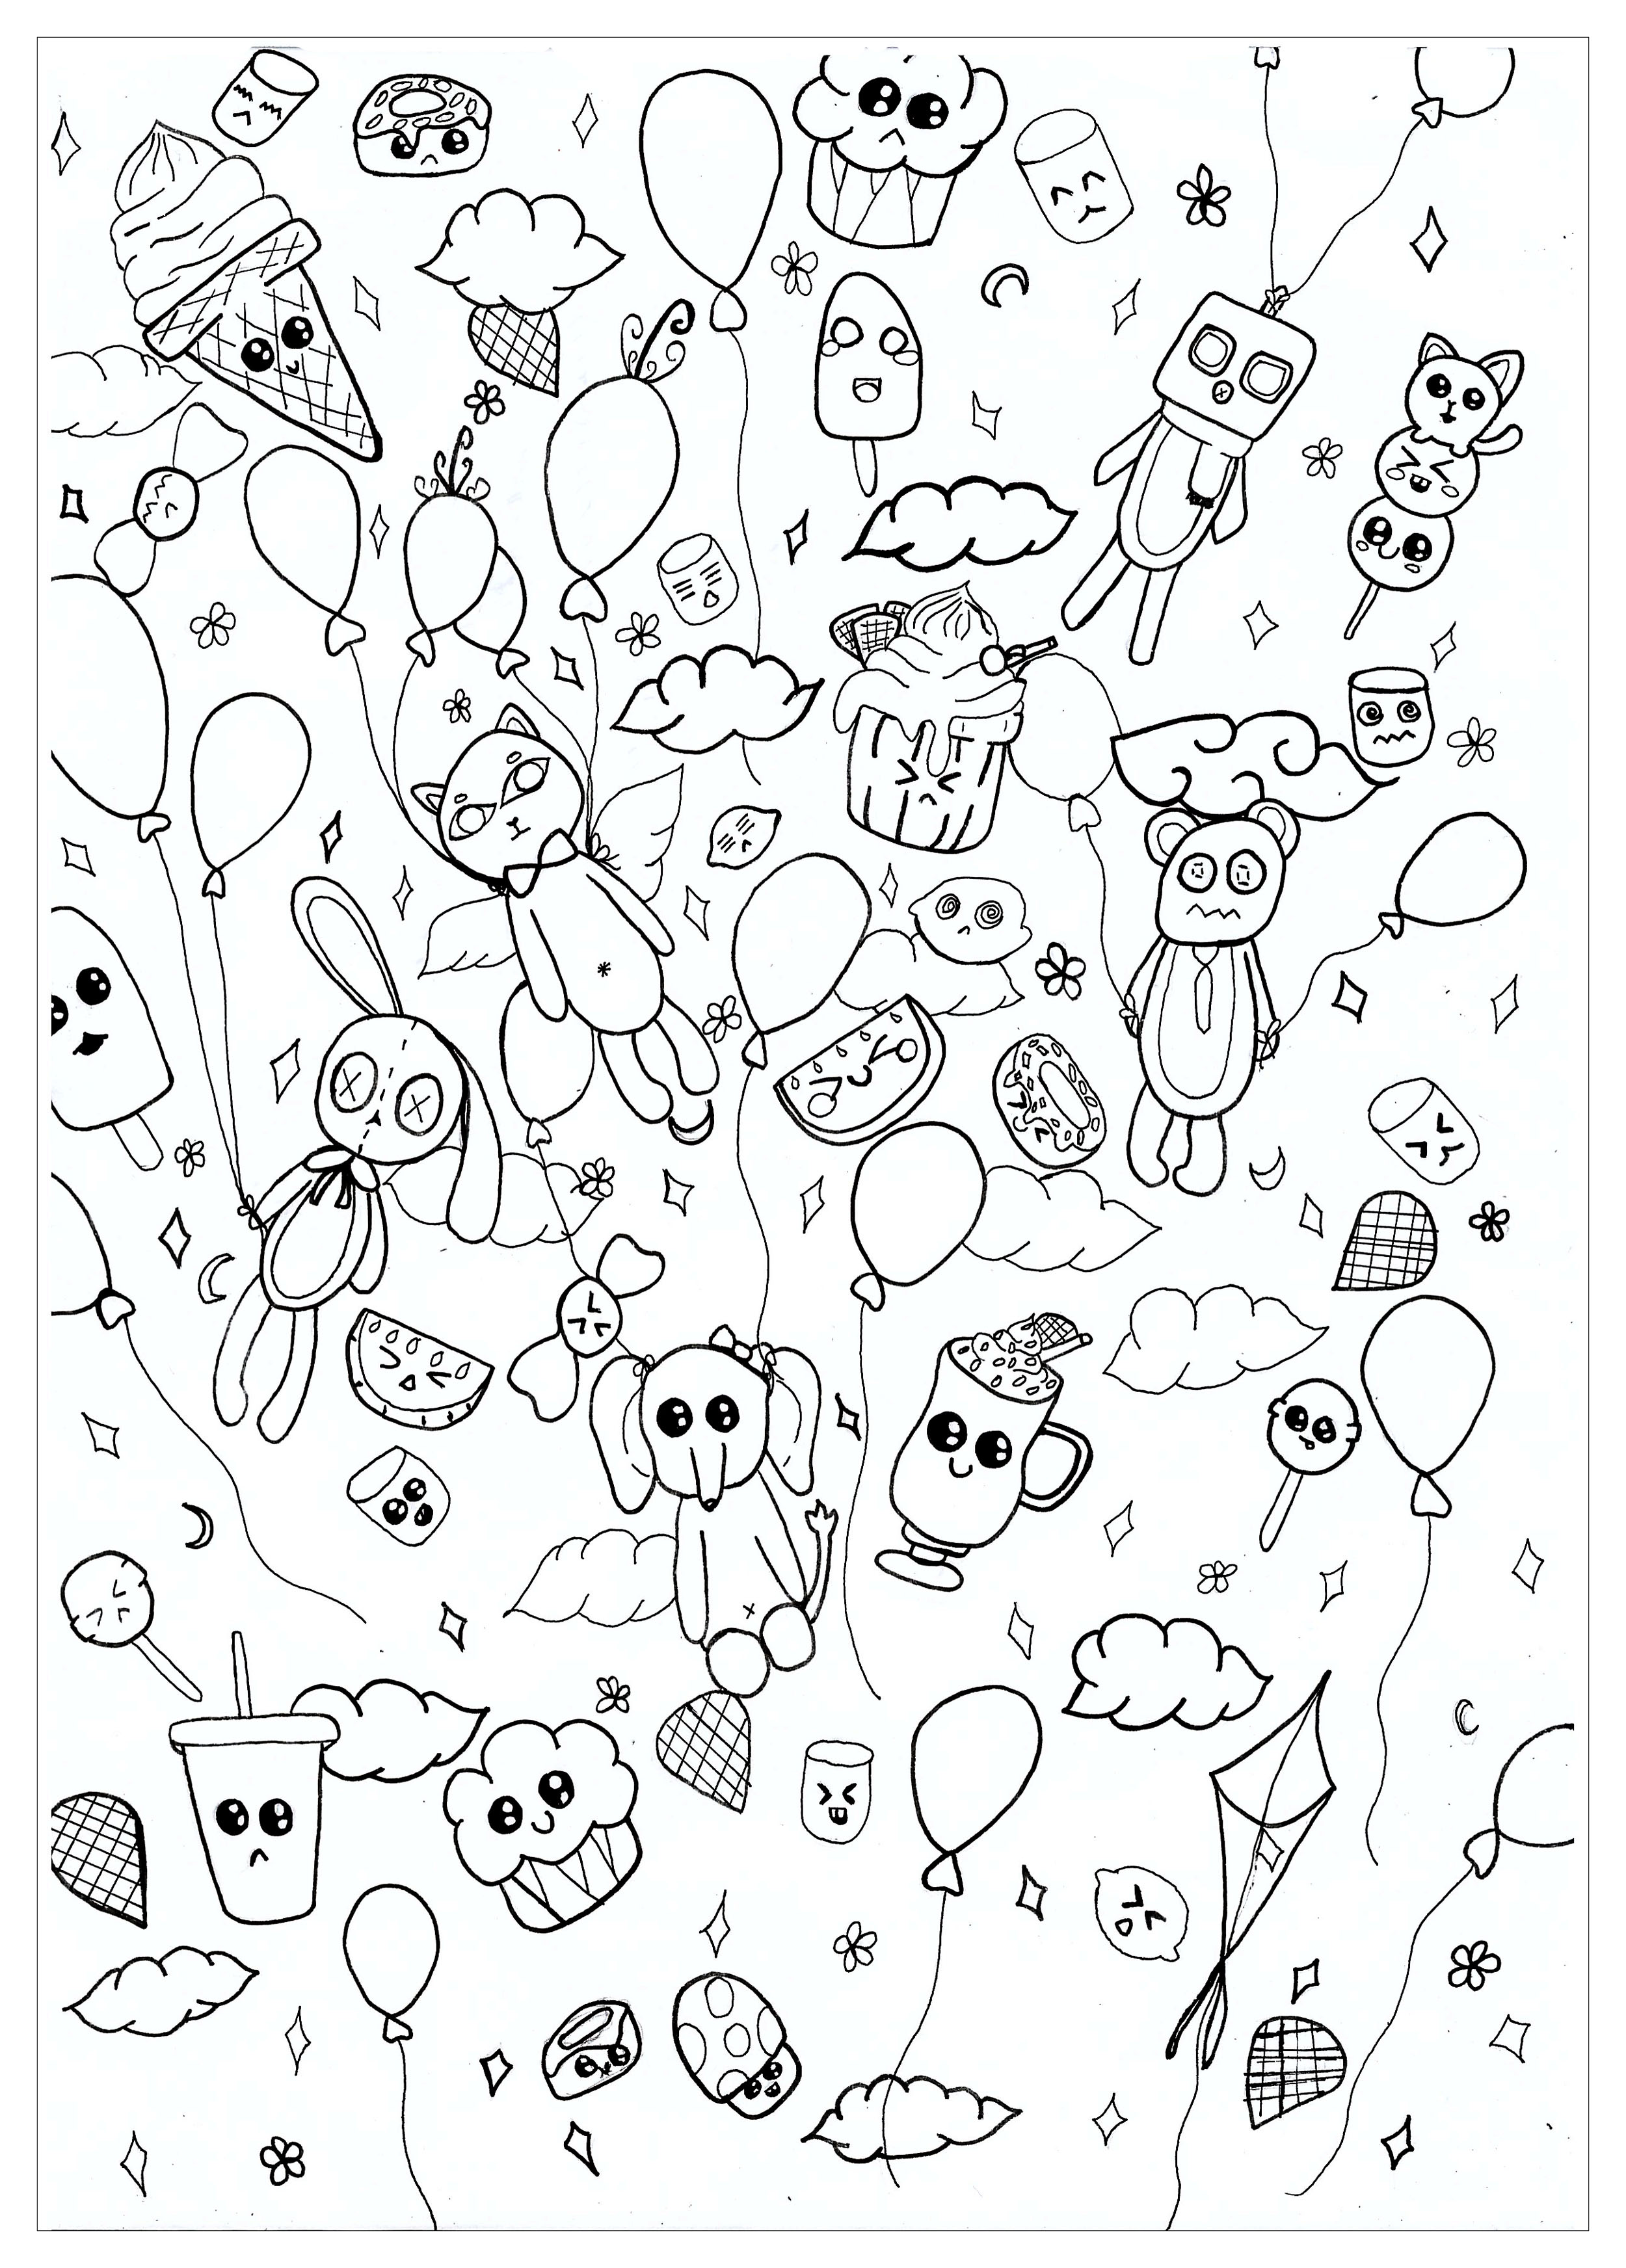 Kawaii coloring page with few details for kids